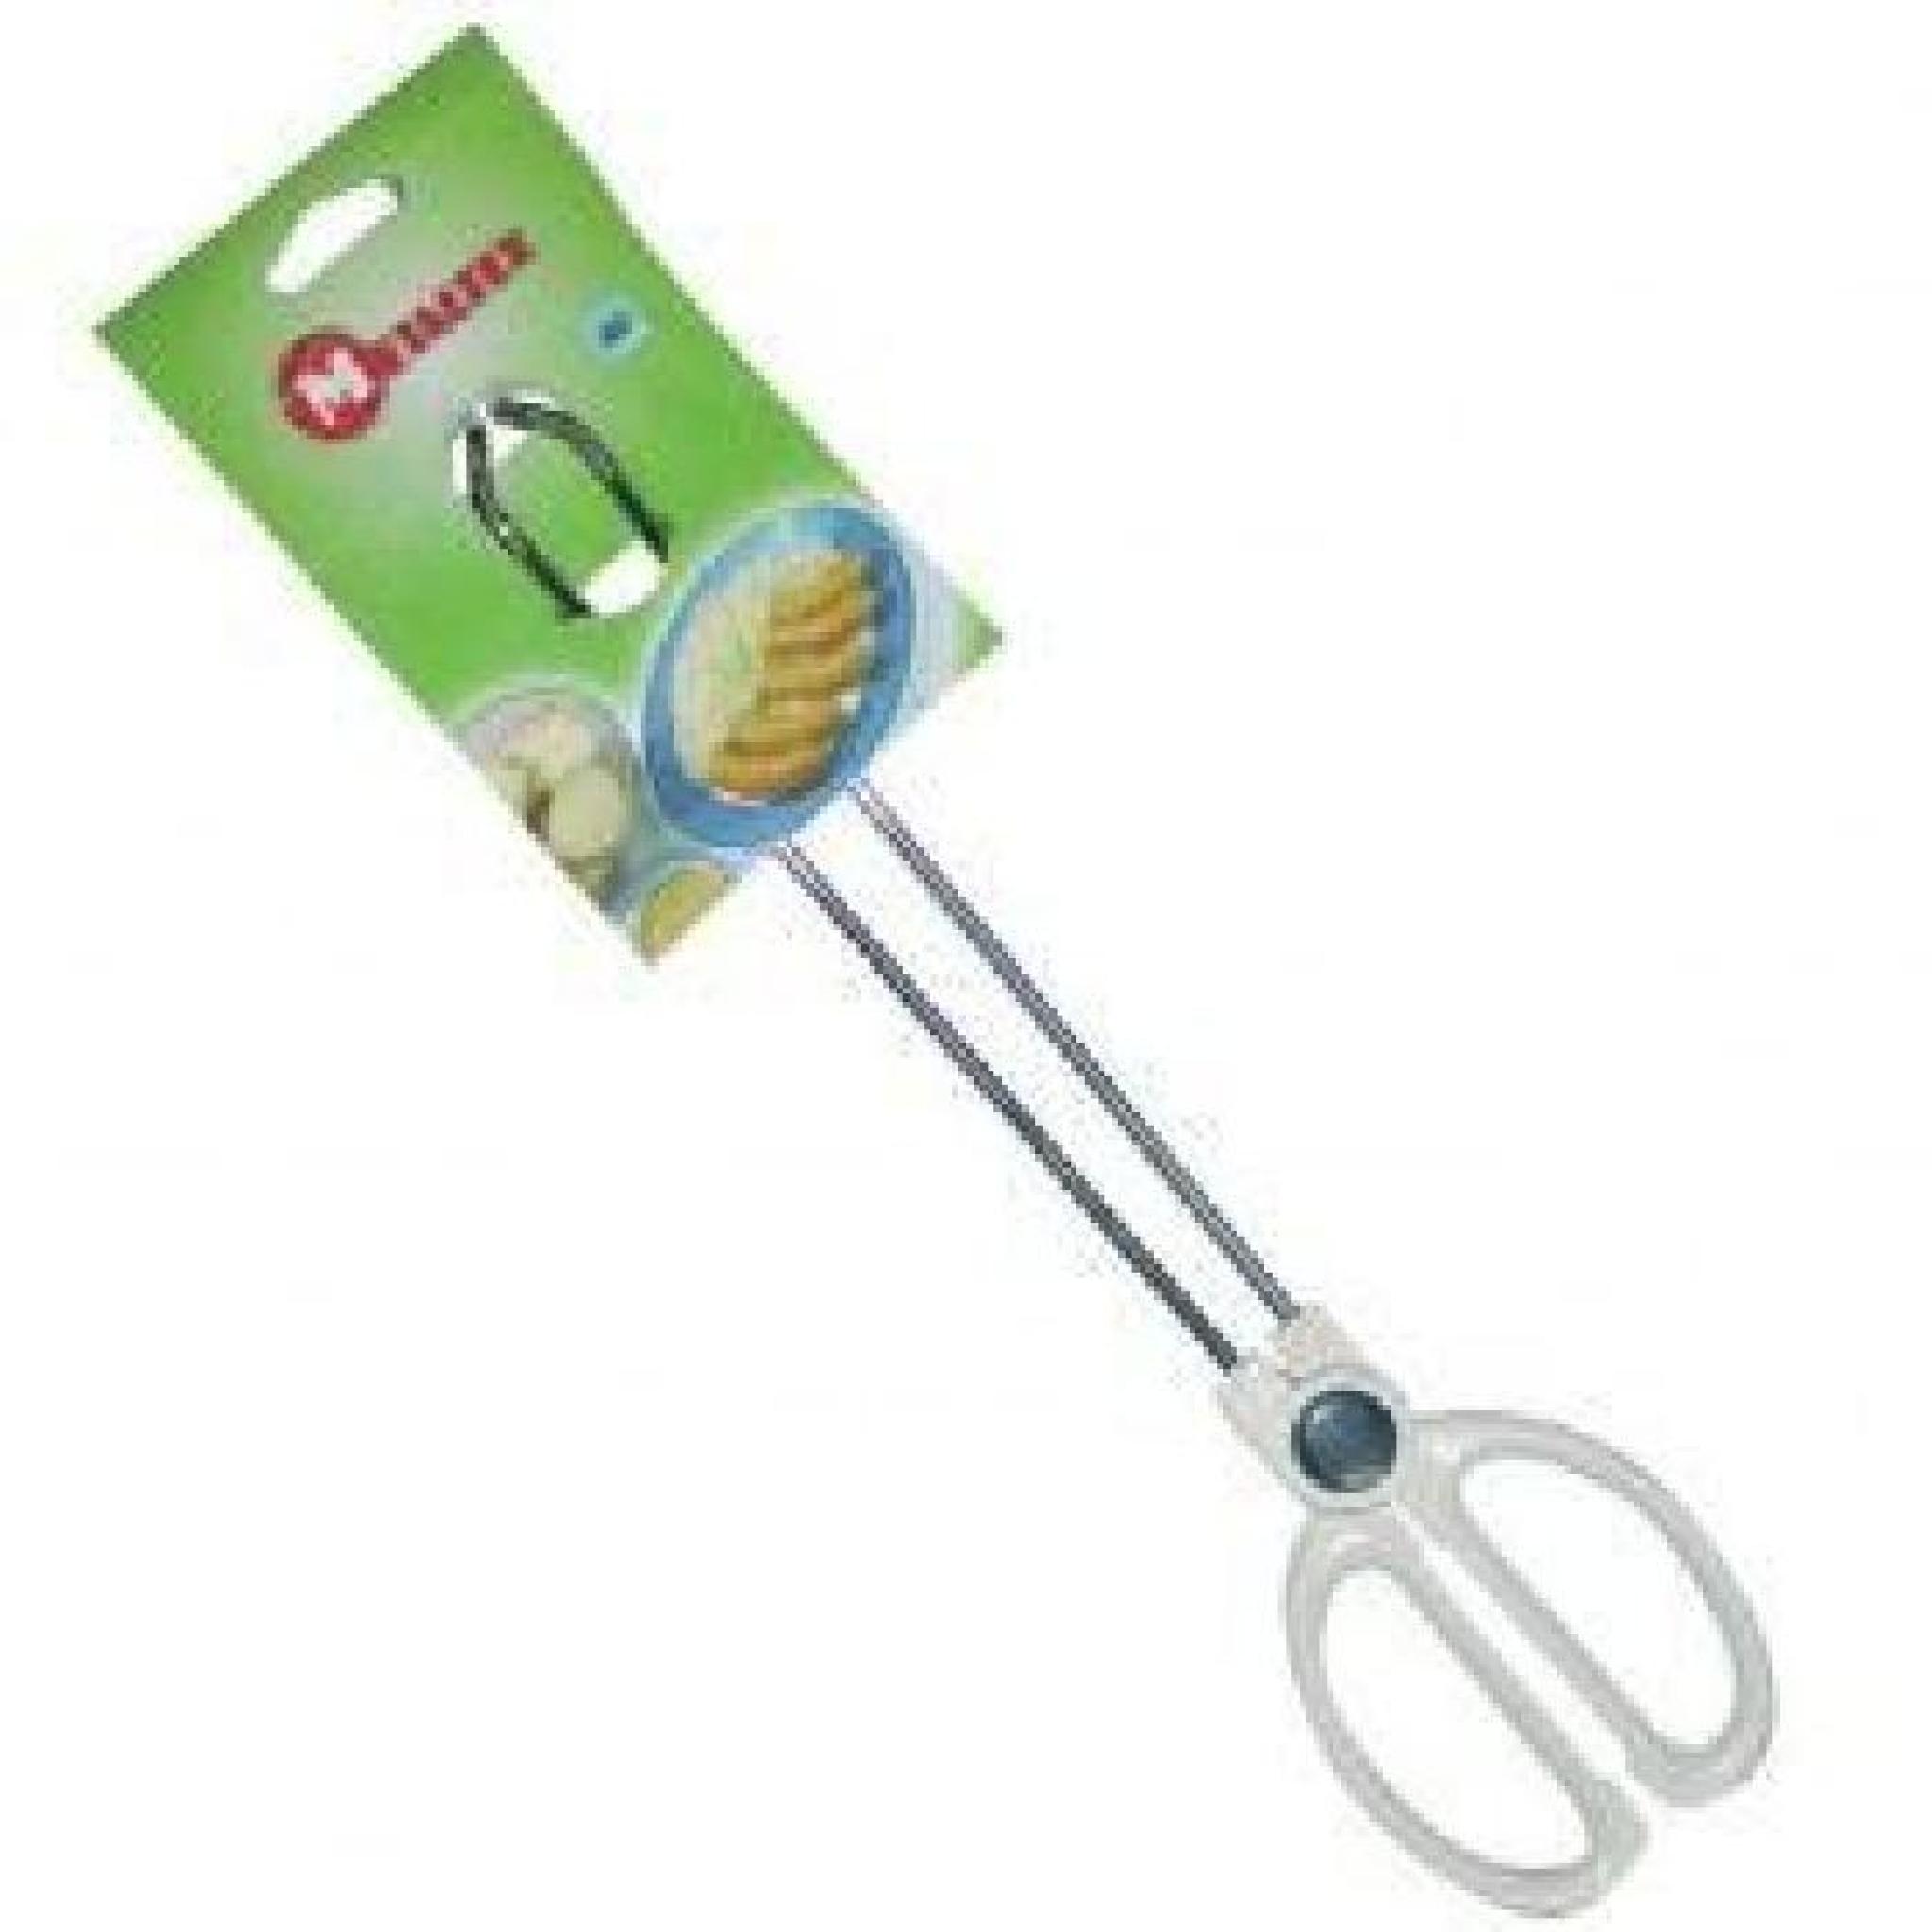 Pince grillage et barbecue - 35 cm